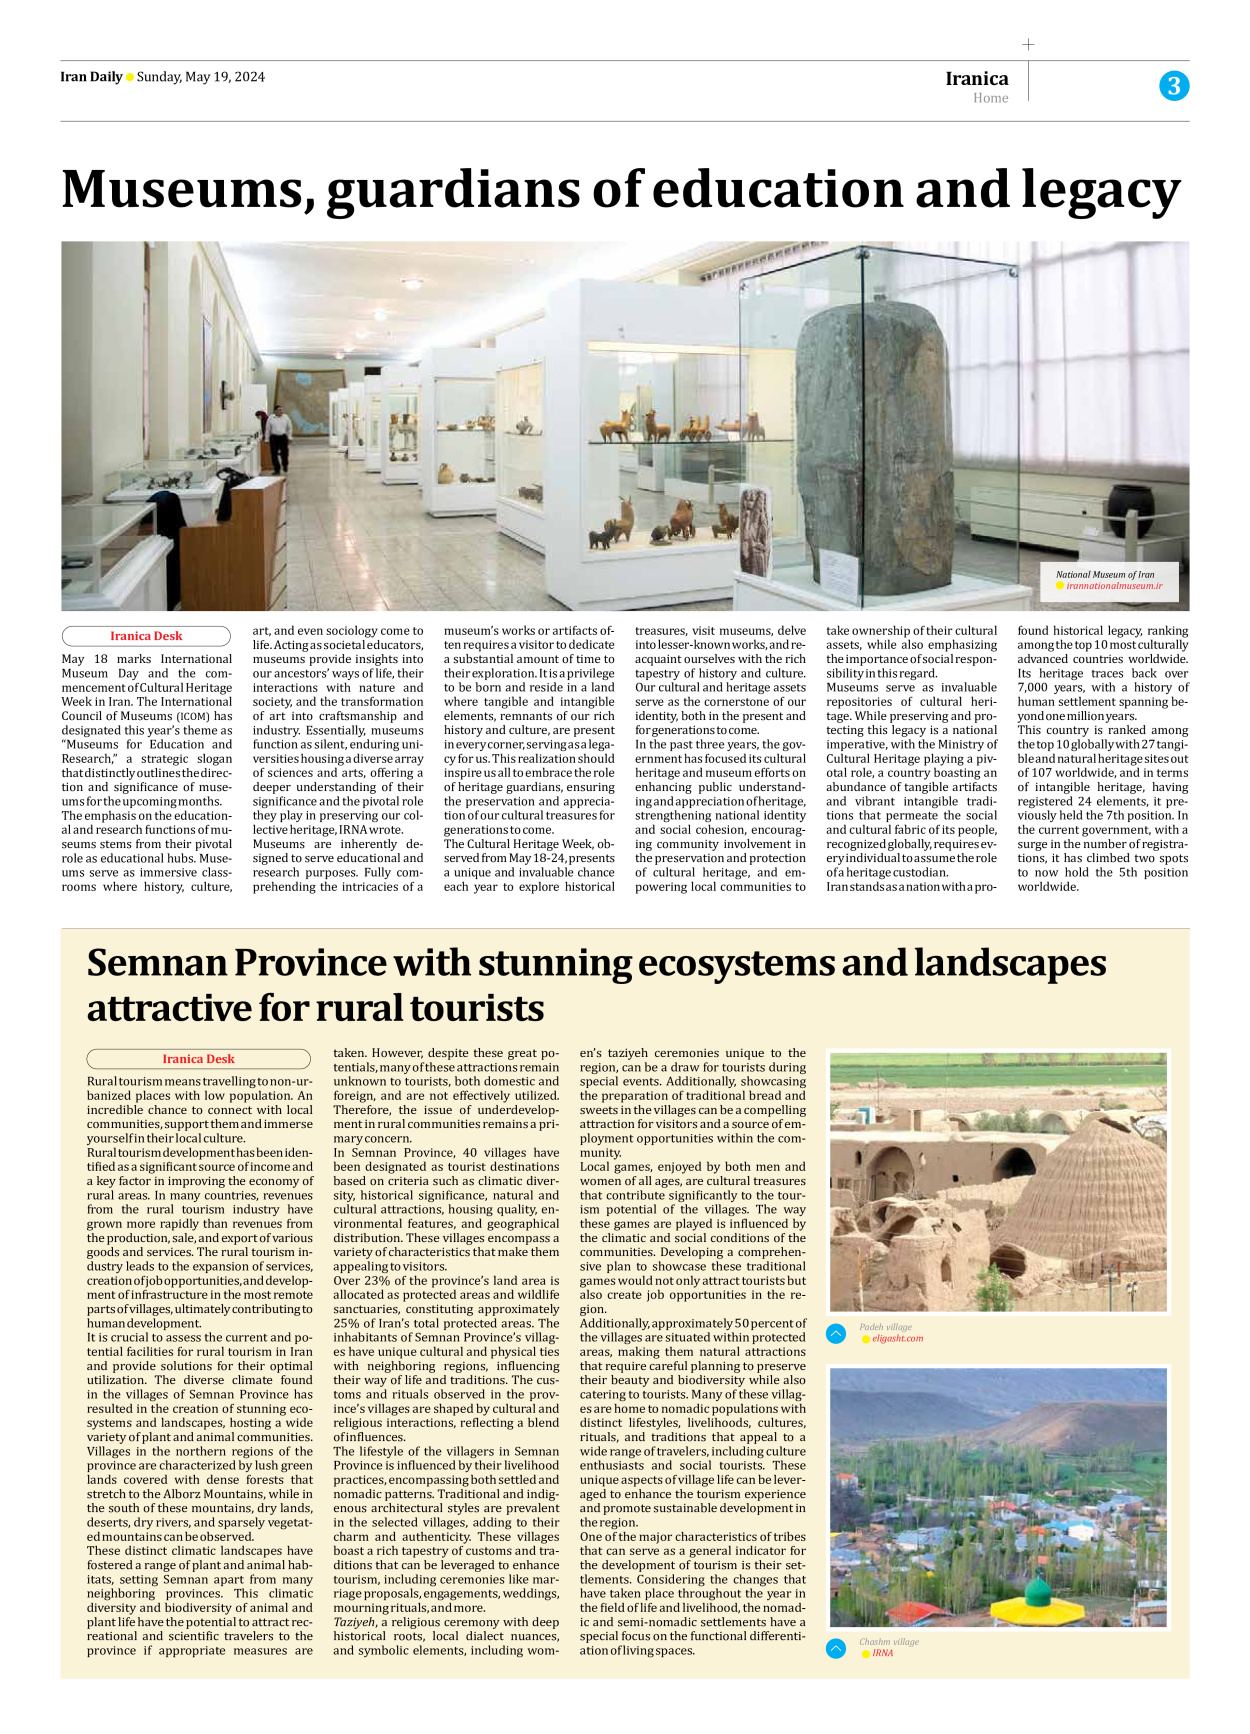 Iran Daily - Number Seven Thousand Five Hundred and Sixty One - 19 May 2024 - Page 3